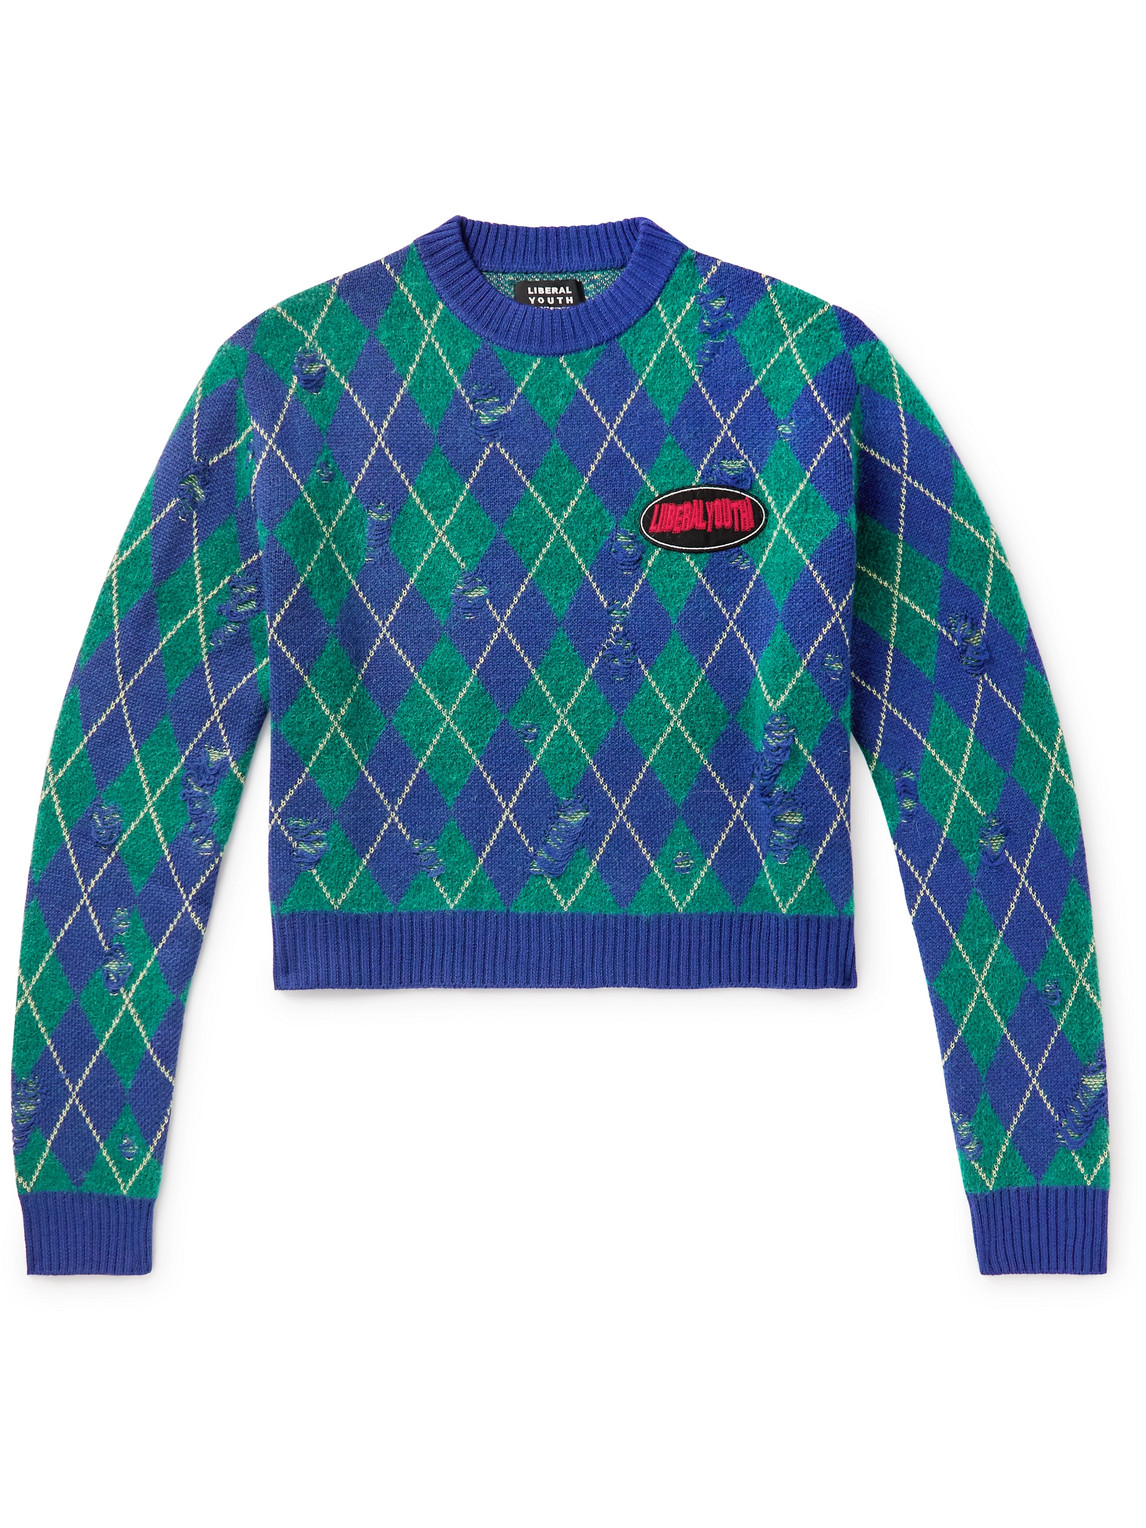 LIBERAL YOUTH MINISTRY LOGO-APPLIQUÉD CHECKED WOOL-BLEND SWEATER